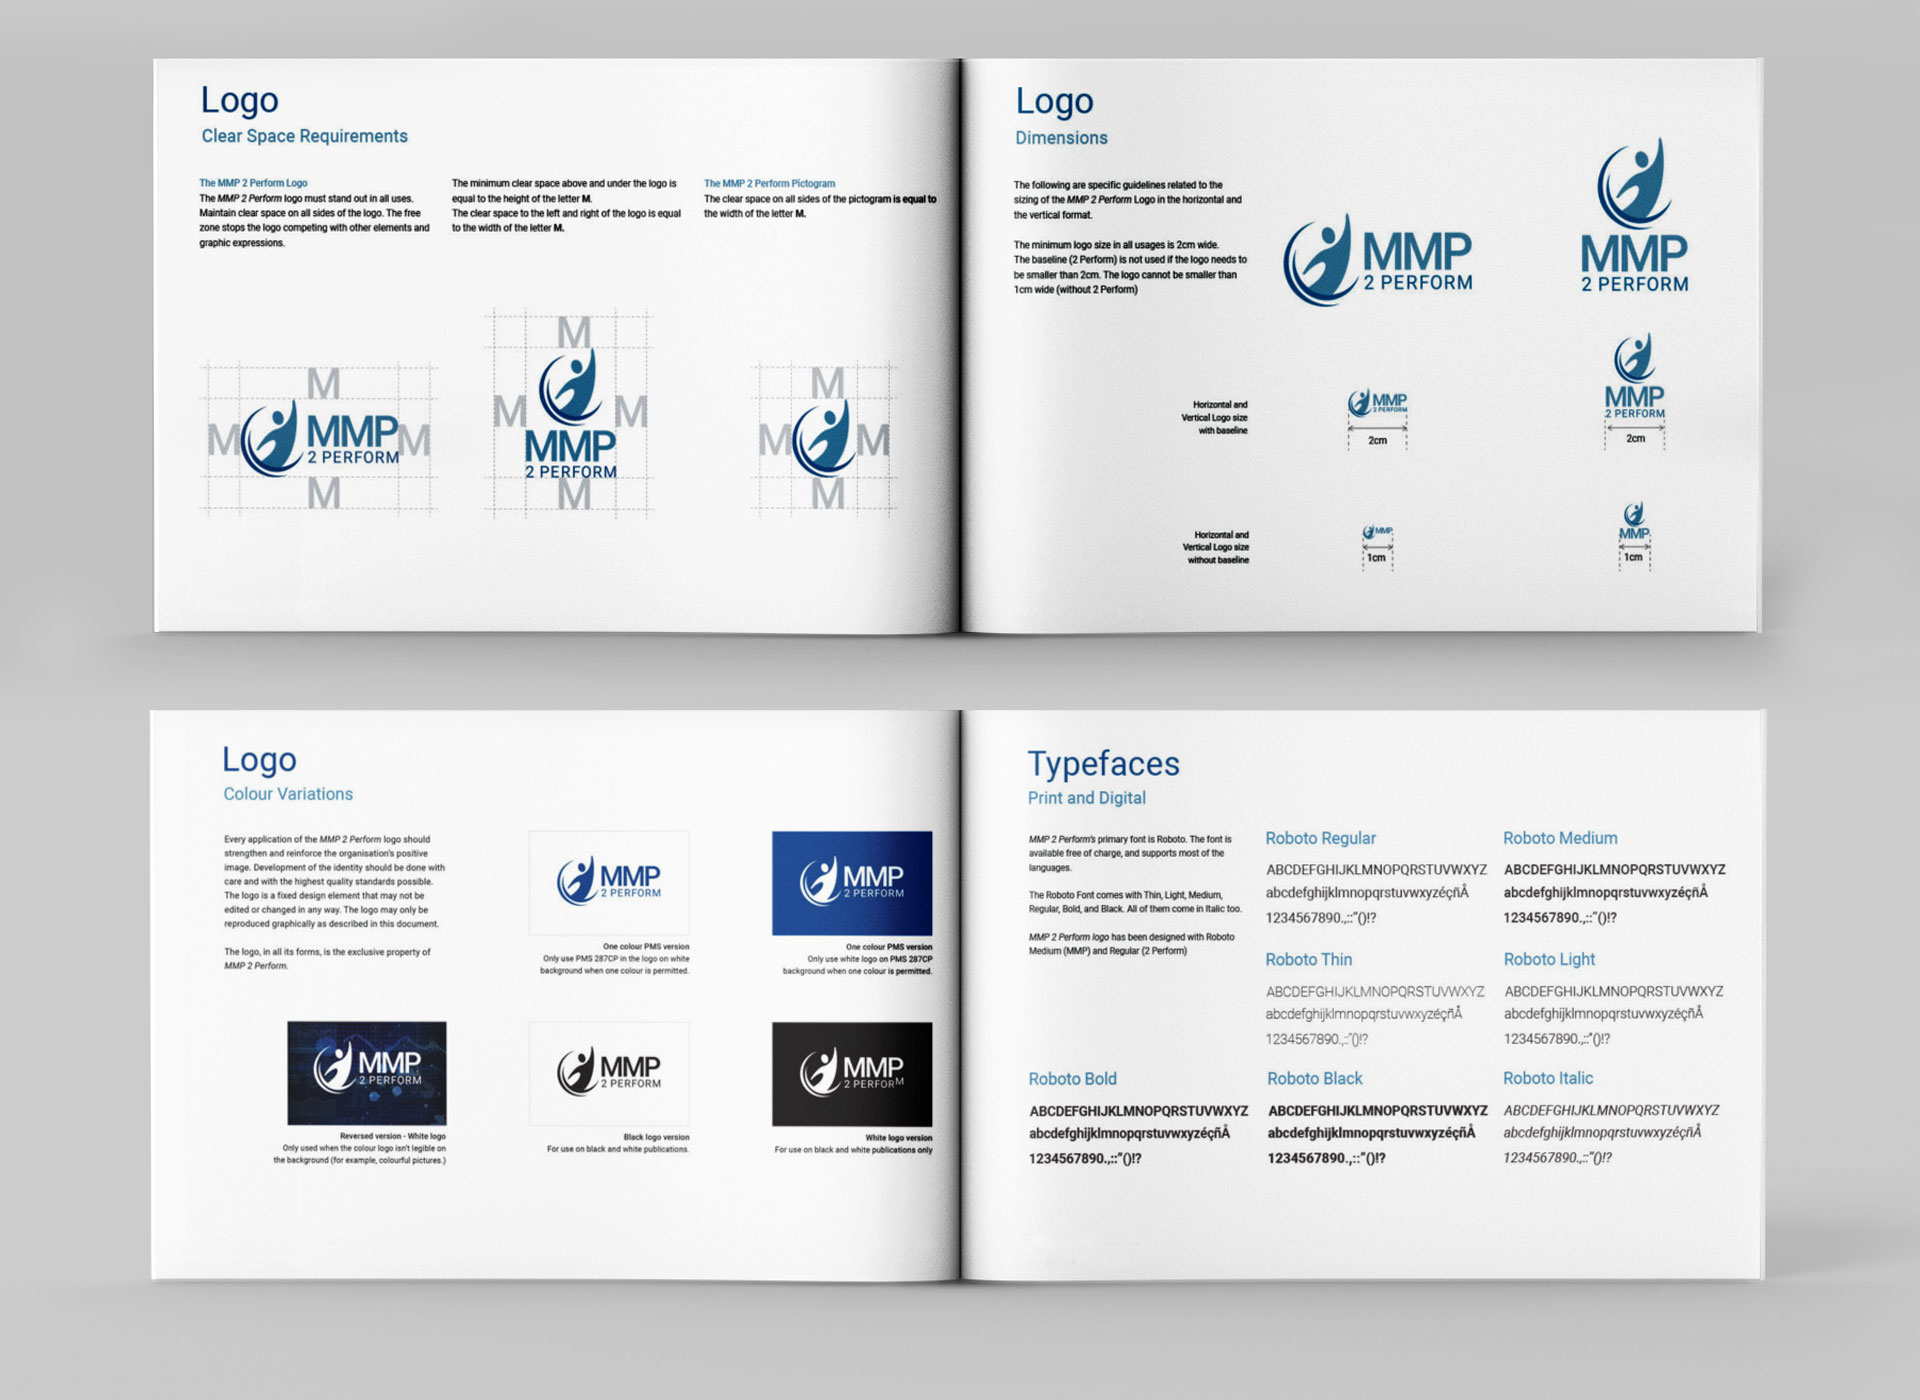 MMP2Perform Brand Guidelines